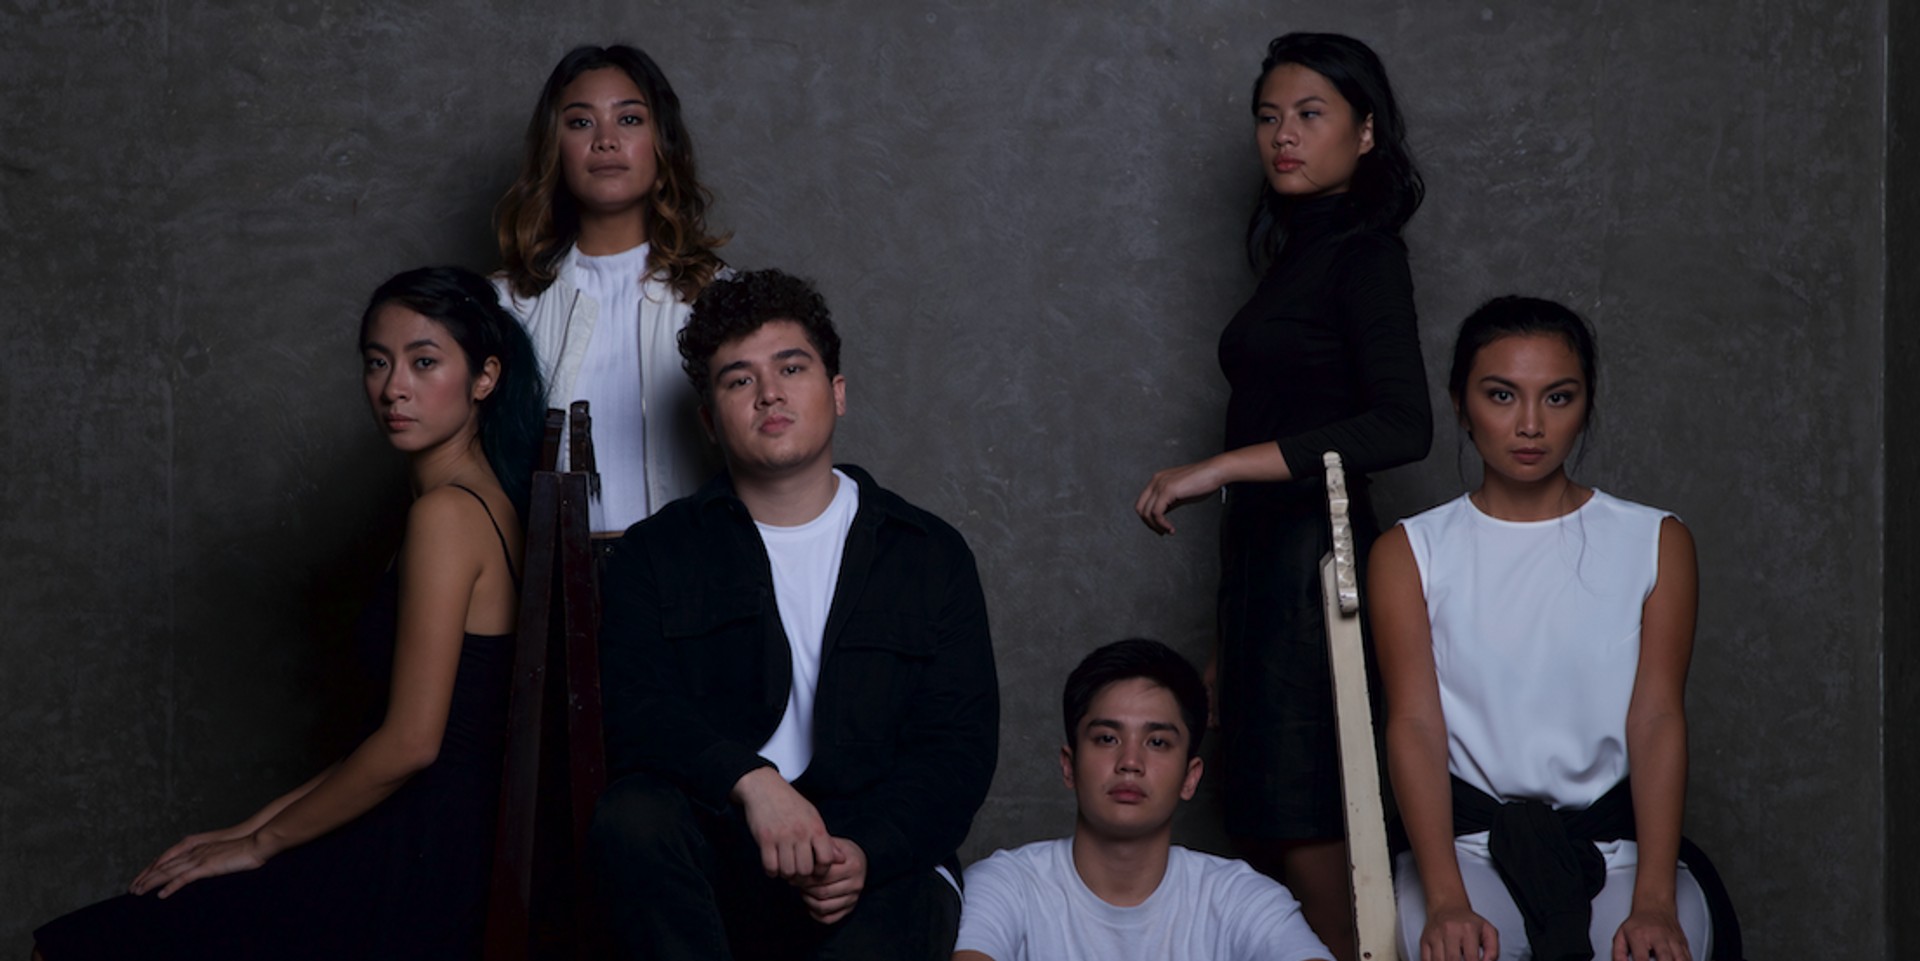 The Ransom Collective selected for Laneway Festival 2018